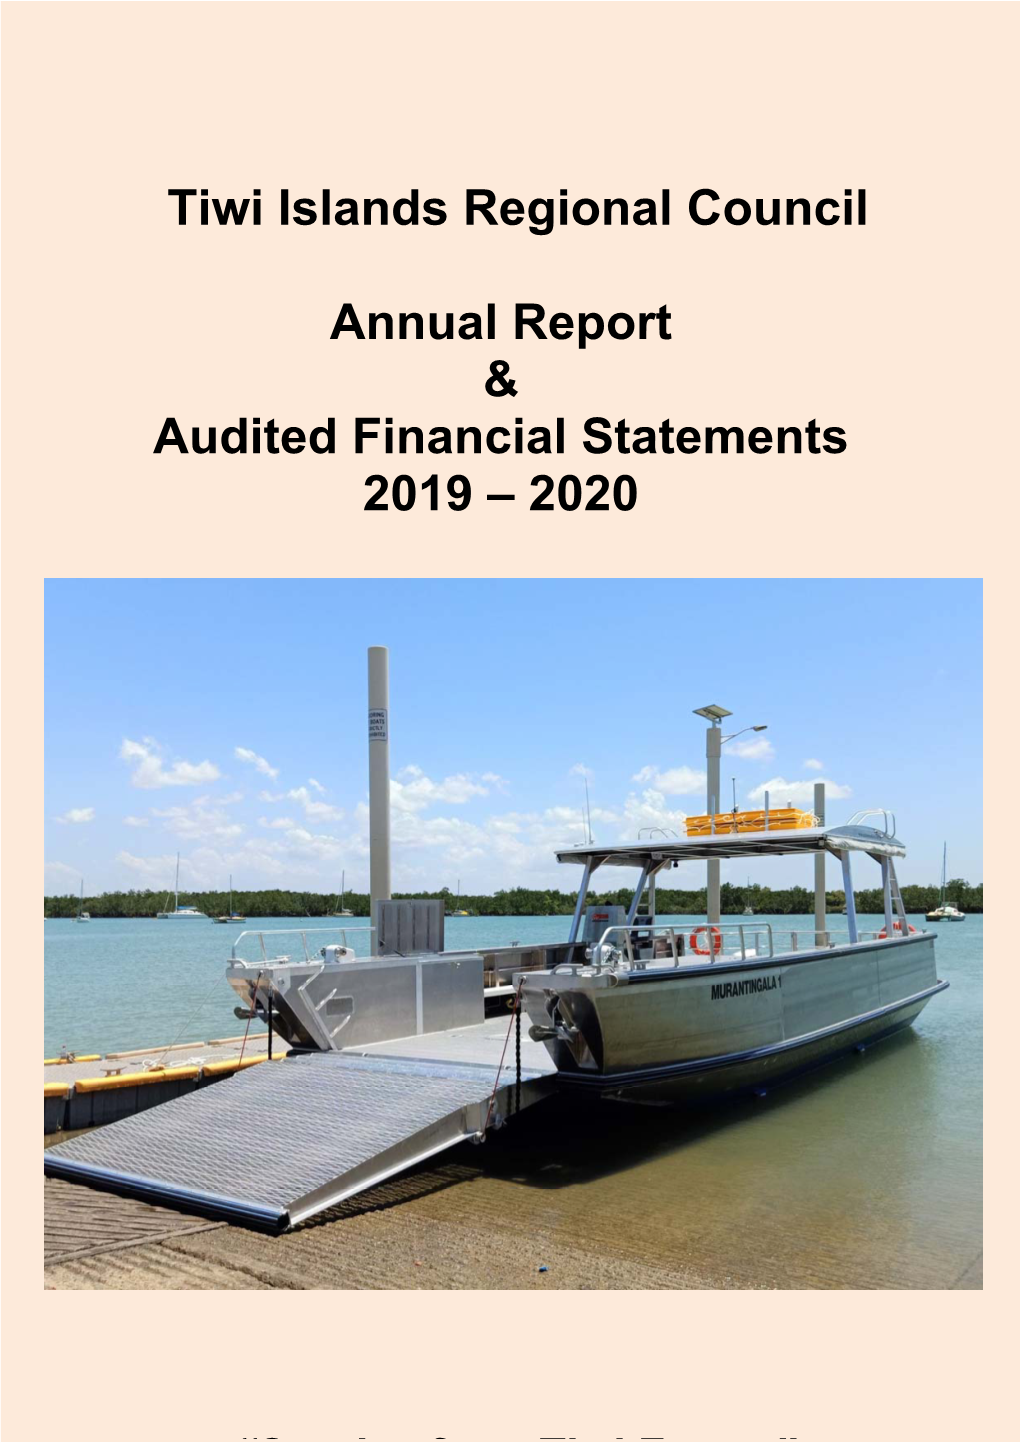 Tiwi Islands Regional Council Annual Report & Audited Financial